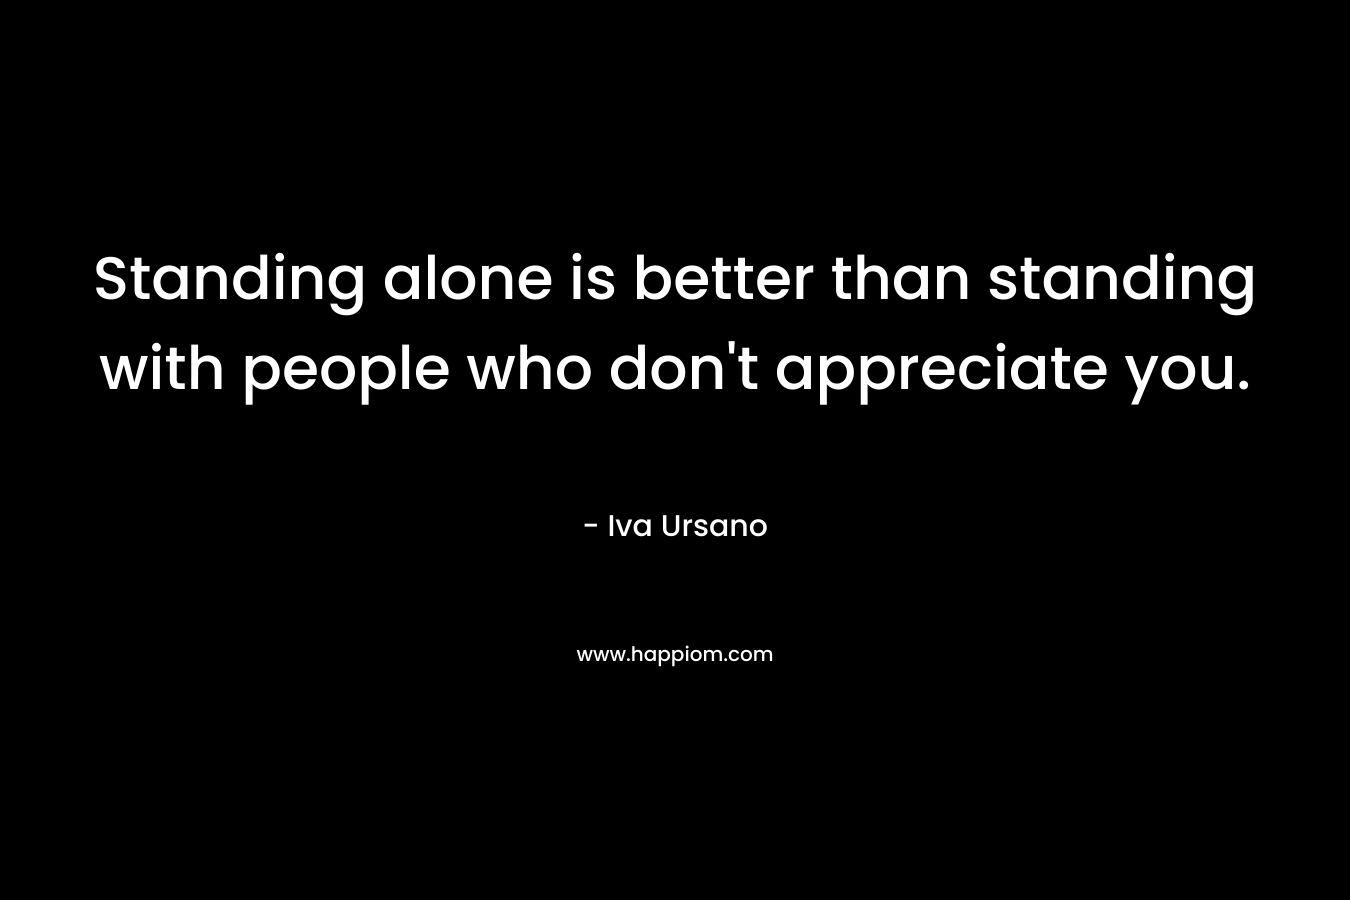 Standing alone is better than standing with people who don't appreciate you.